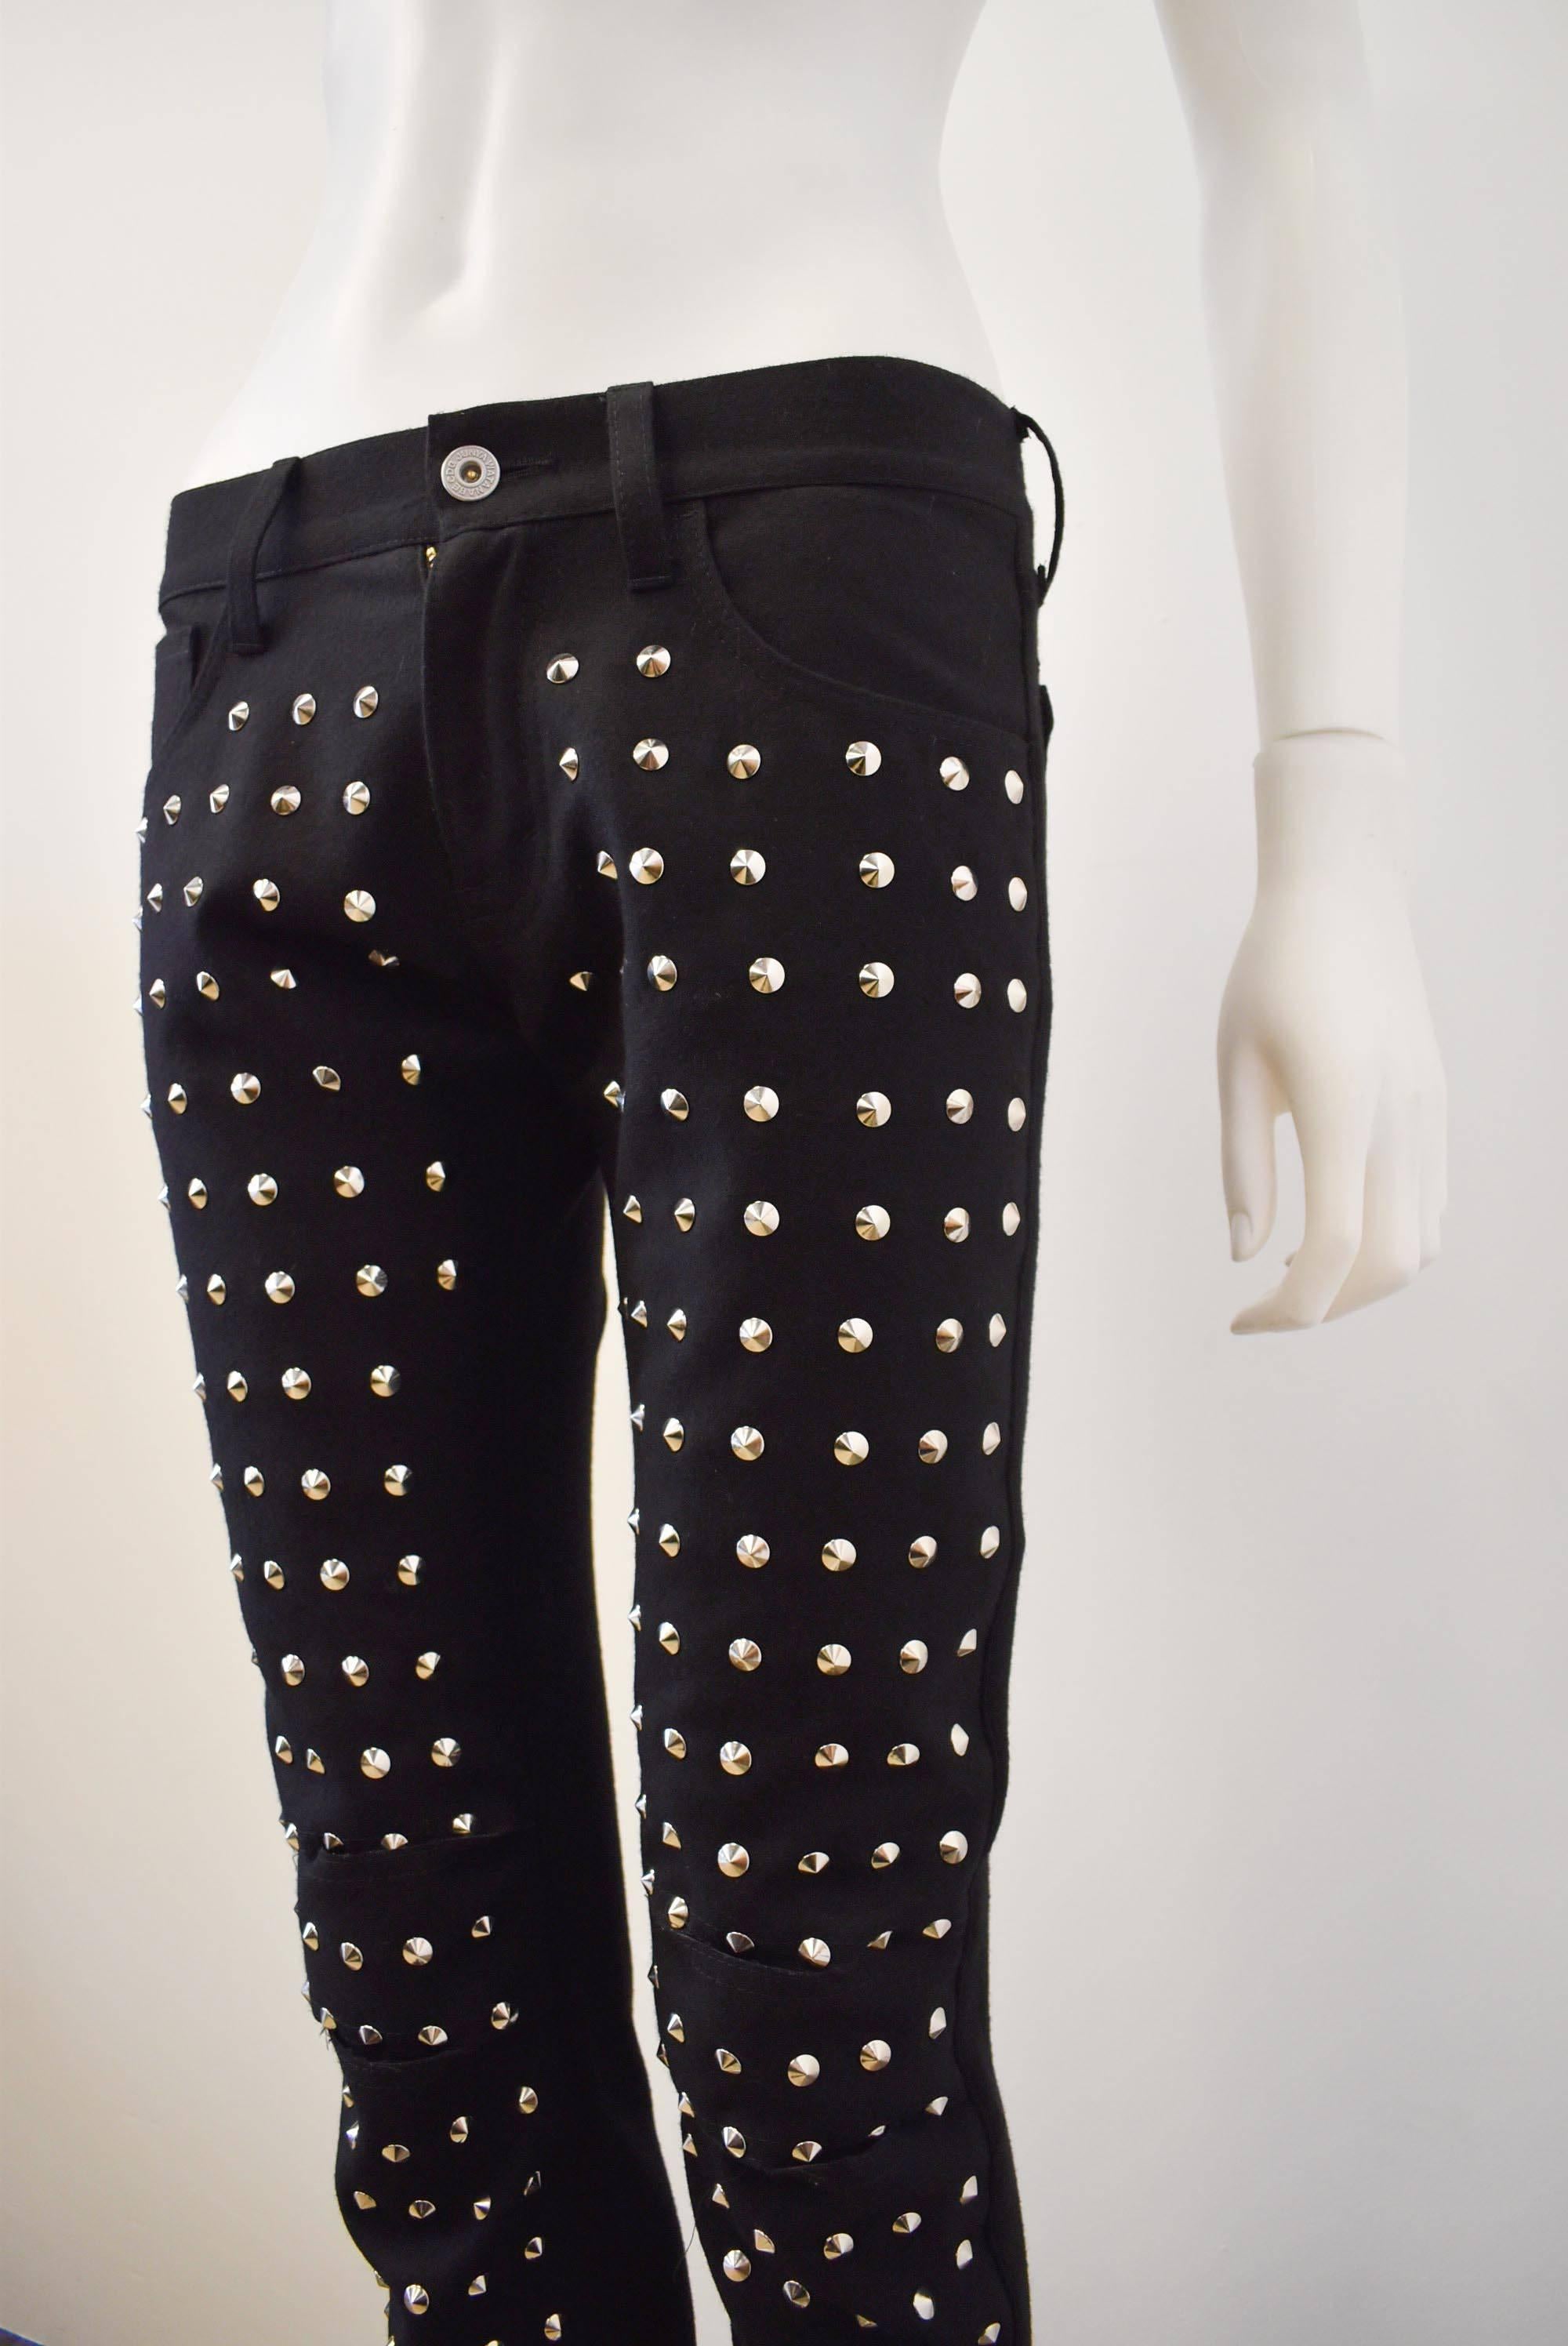 A pair of black jeans-like cotton stretch trousers by Junya Watanabe. The 
front of the black jeans are decorated with rows of metal studs and incisions 
in the knees for an interpretation of the ripped denim style, creating a modern punk